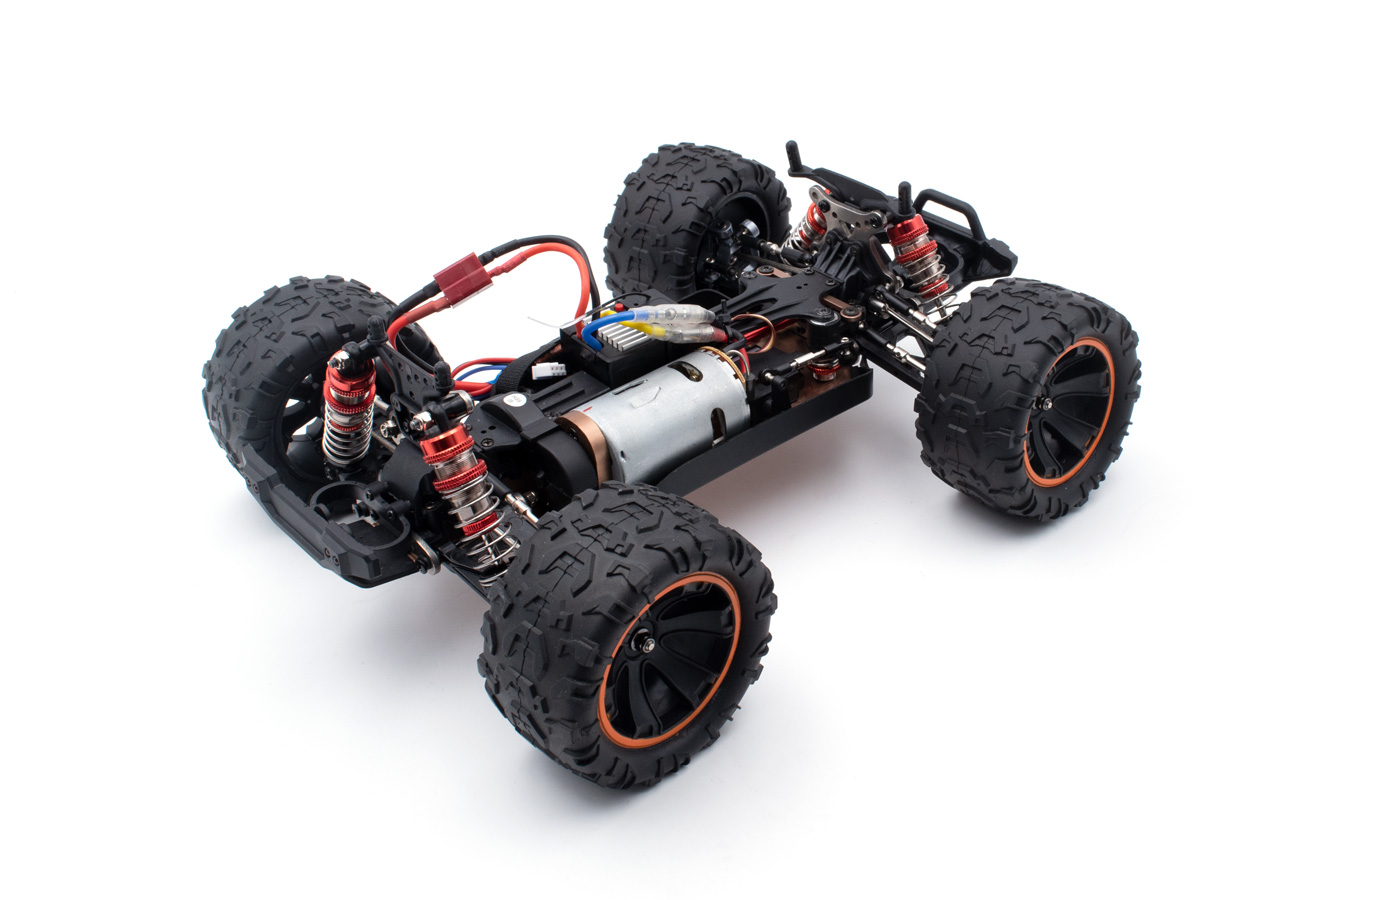 MODSTER Mini Dasher Electric Brushed Monster Truck 4WD 1:14 RTR